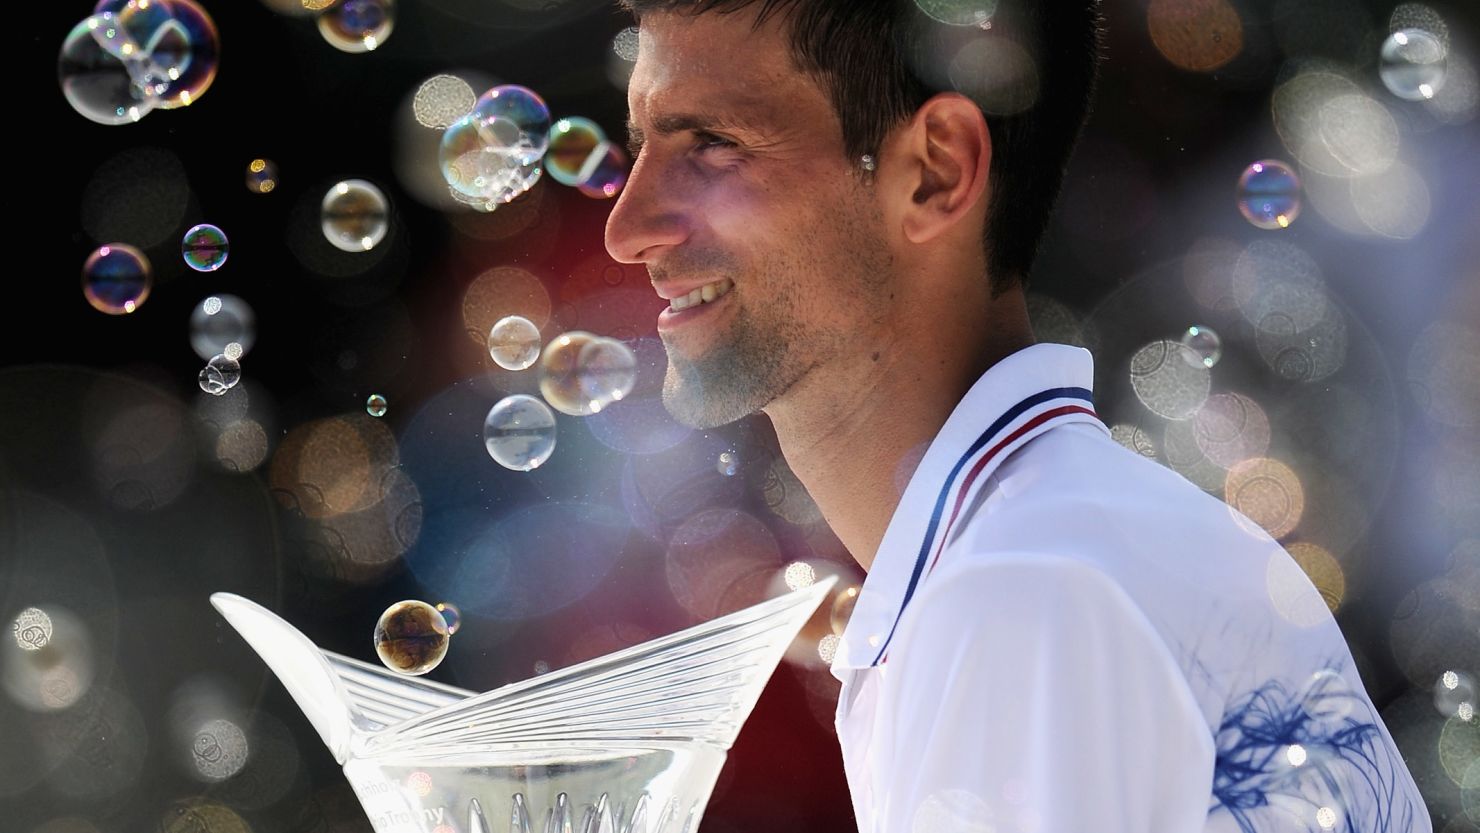 Novak Djokovic retained the Miami Masters 1000 trophy with a straight sets final win over Andy Murray.